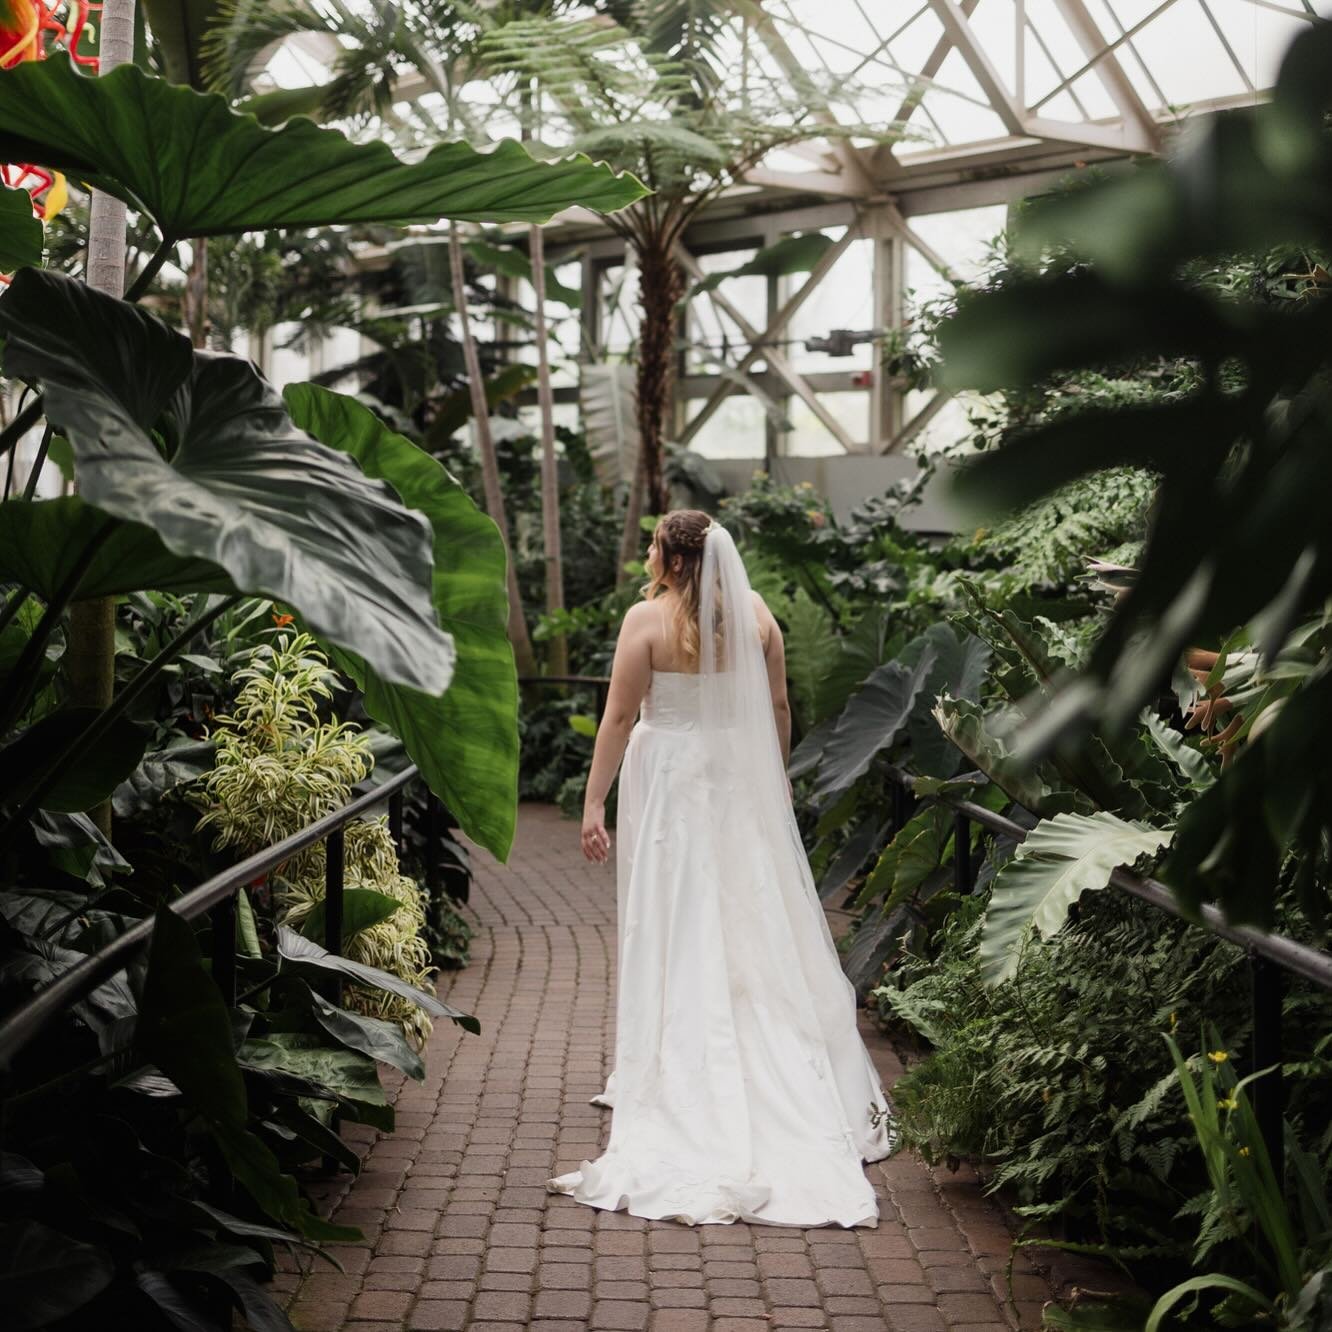 🌴never a bad angle when shooting in this greenhouse